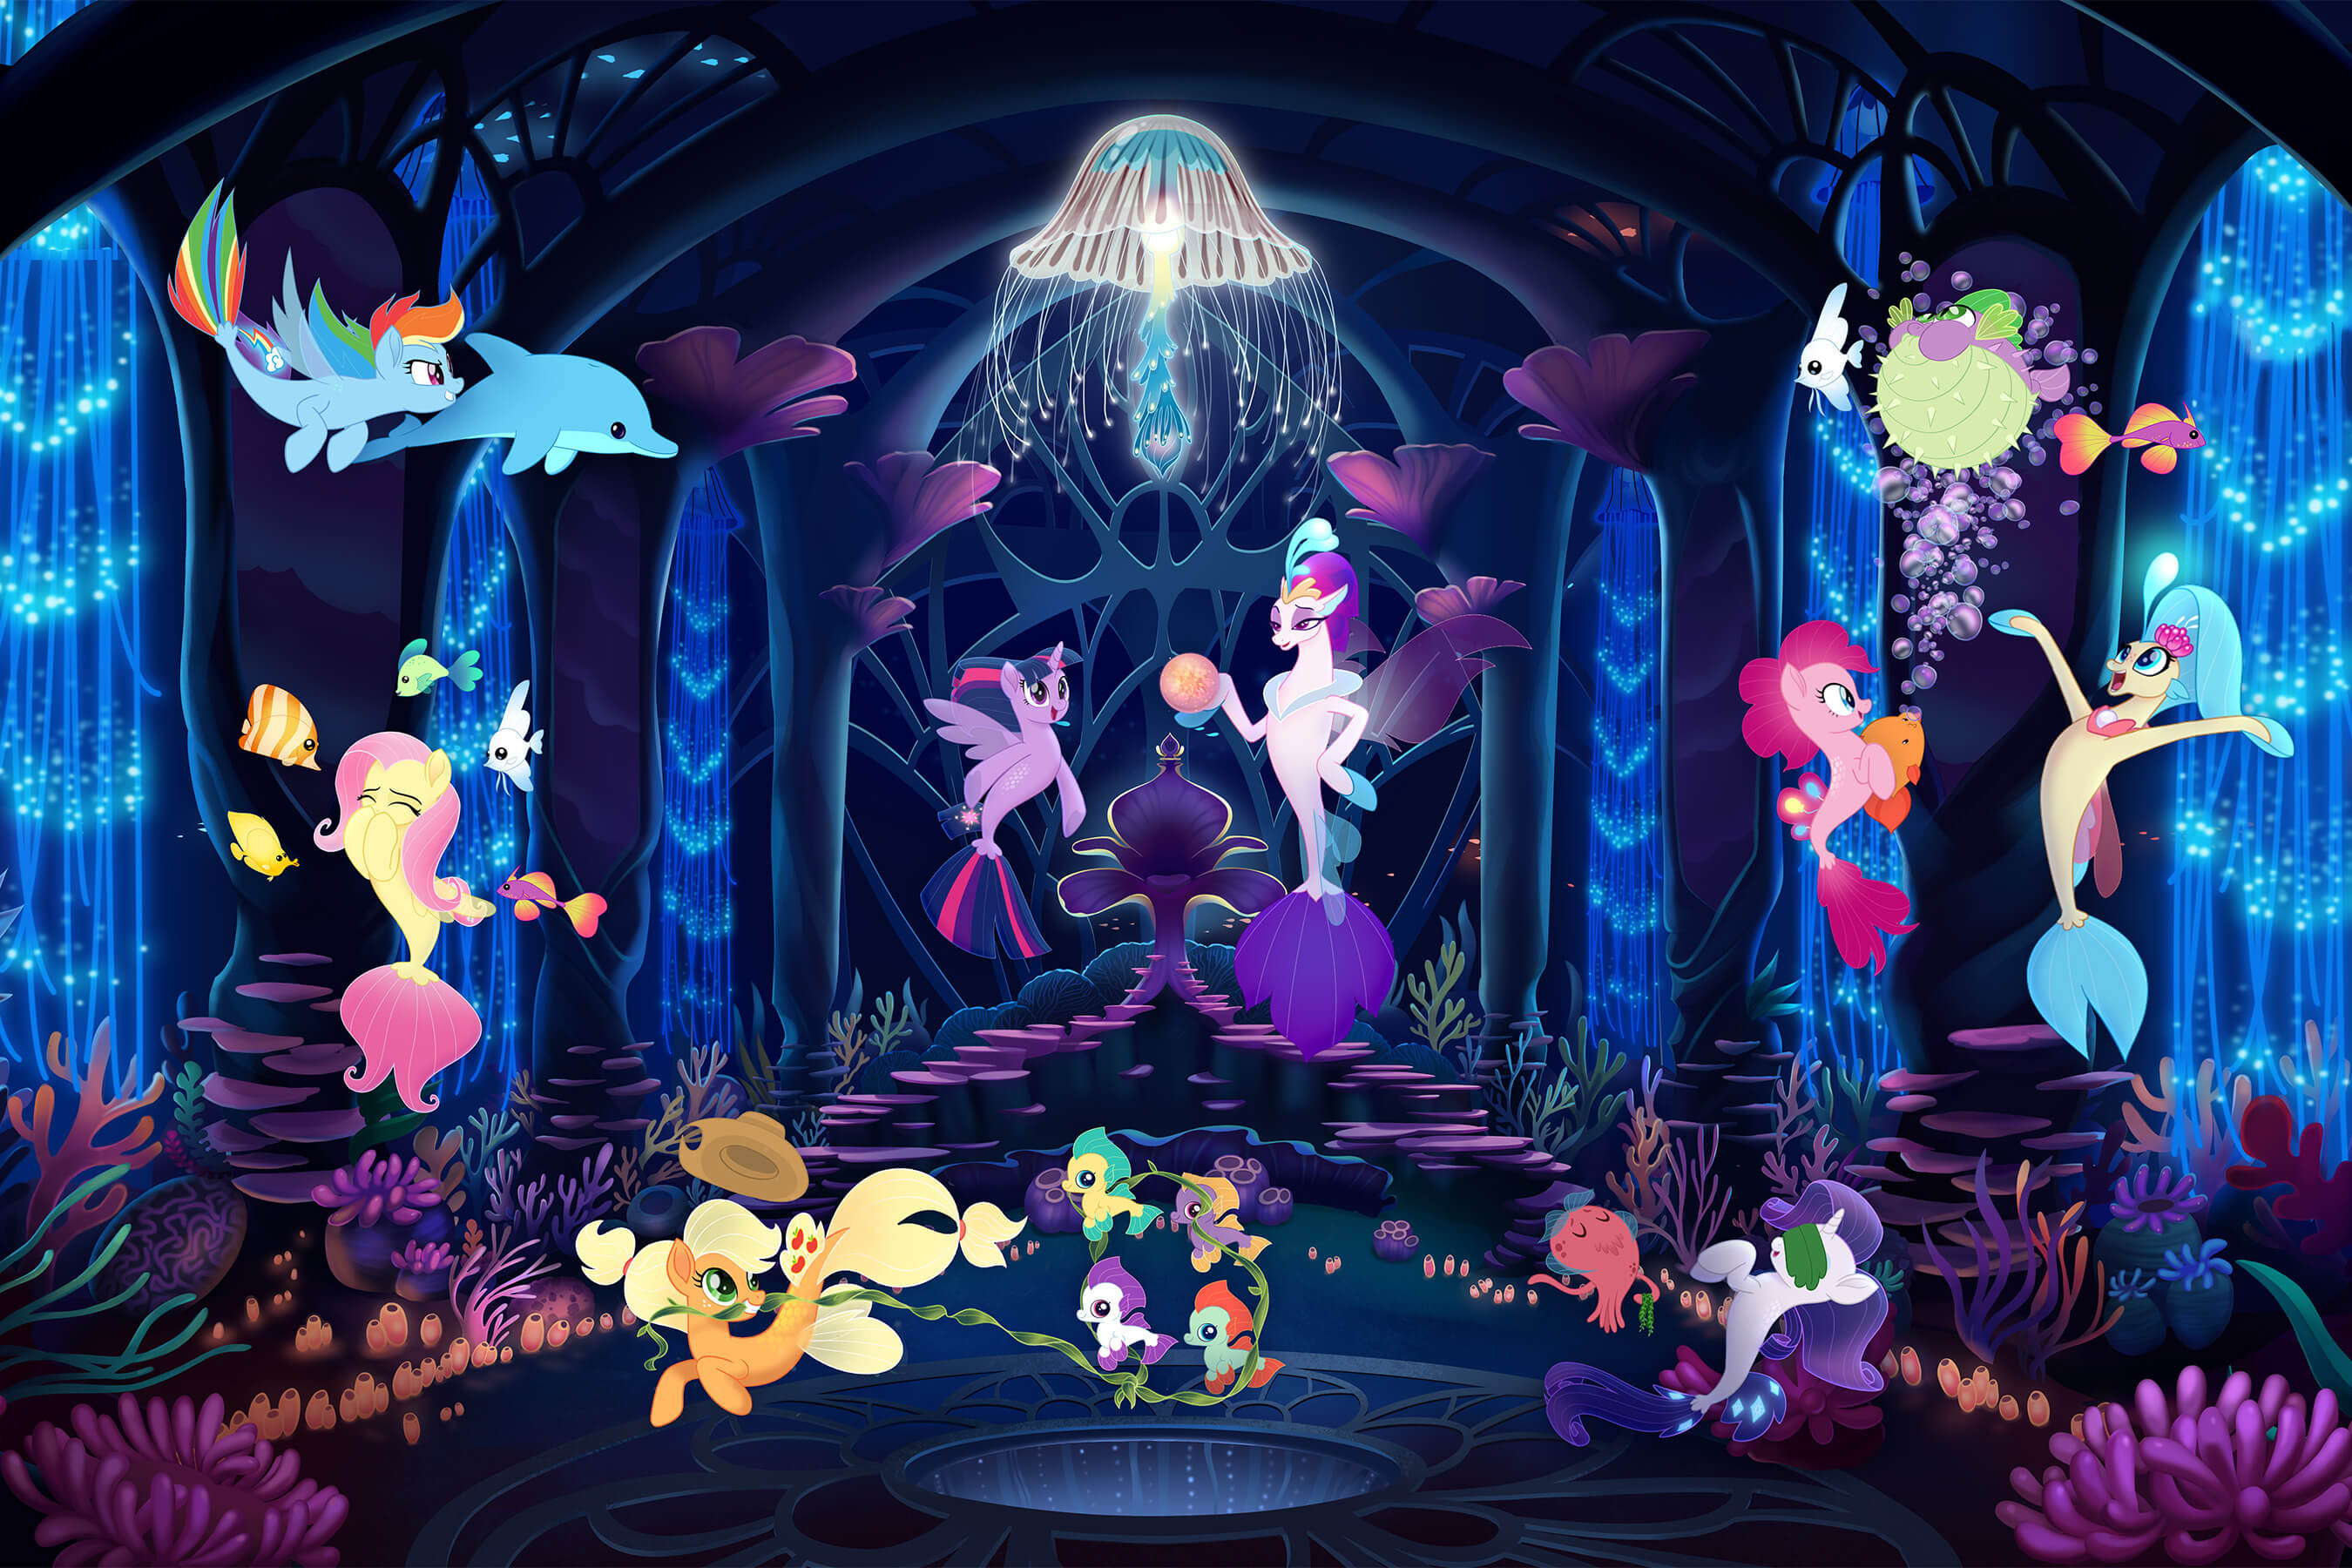 Star Studded Cast In Trailer For 'My Little Pony: The Movie'